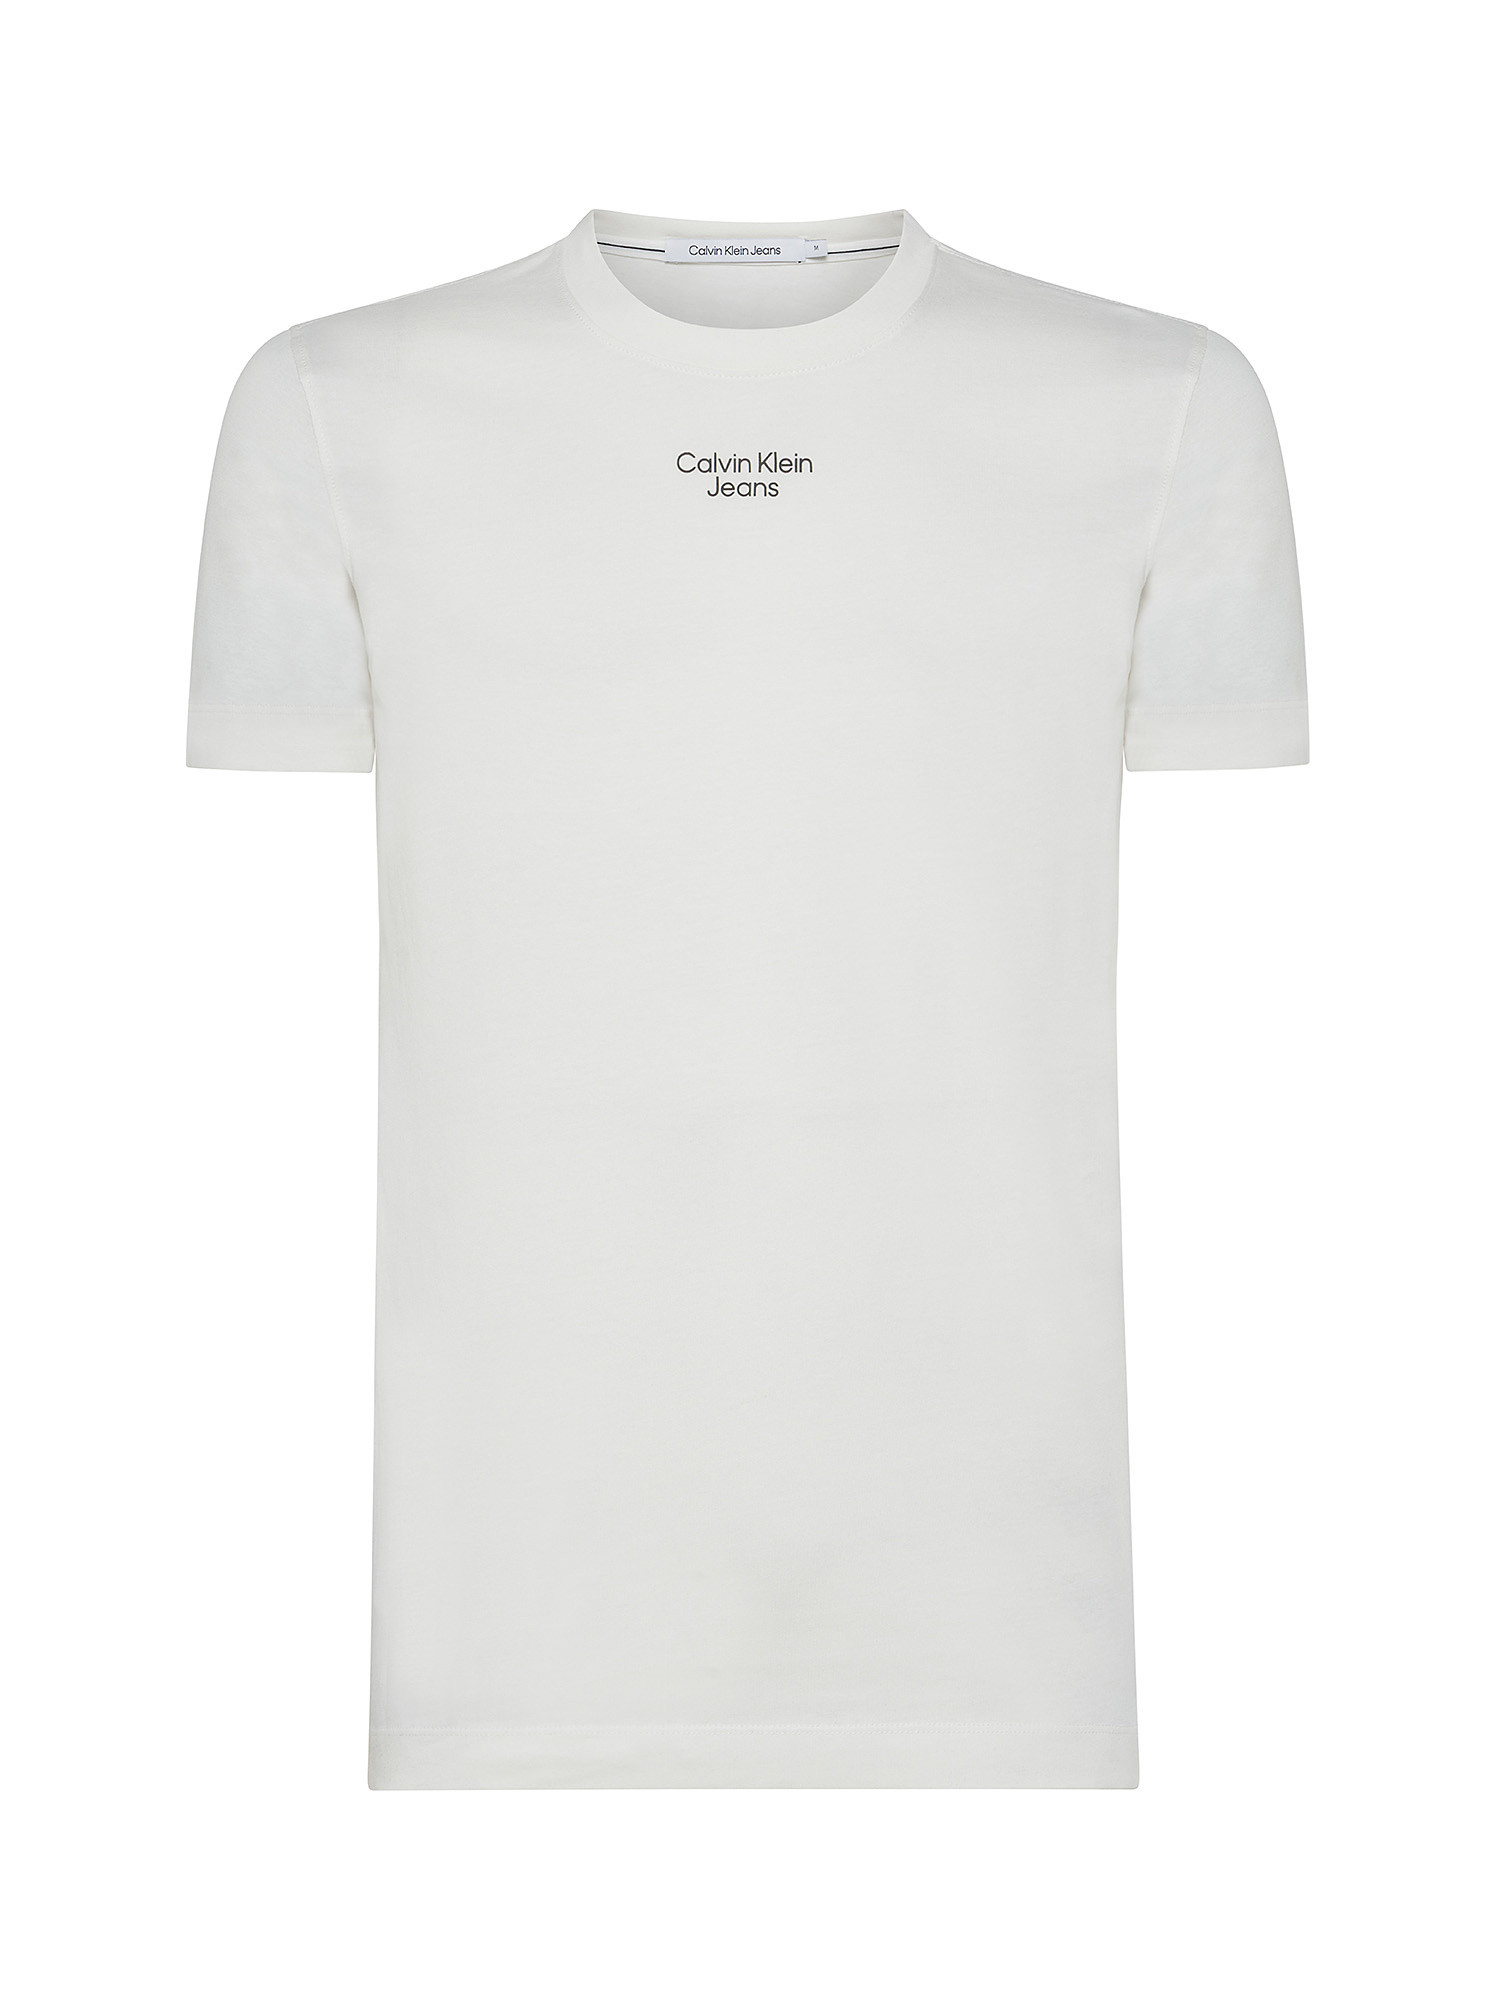 Calvin Klein Jeans - T-shirt slim fit in cotone con logo, Bianco, large image number 0